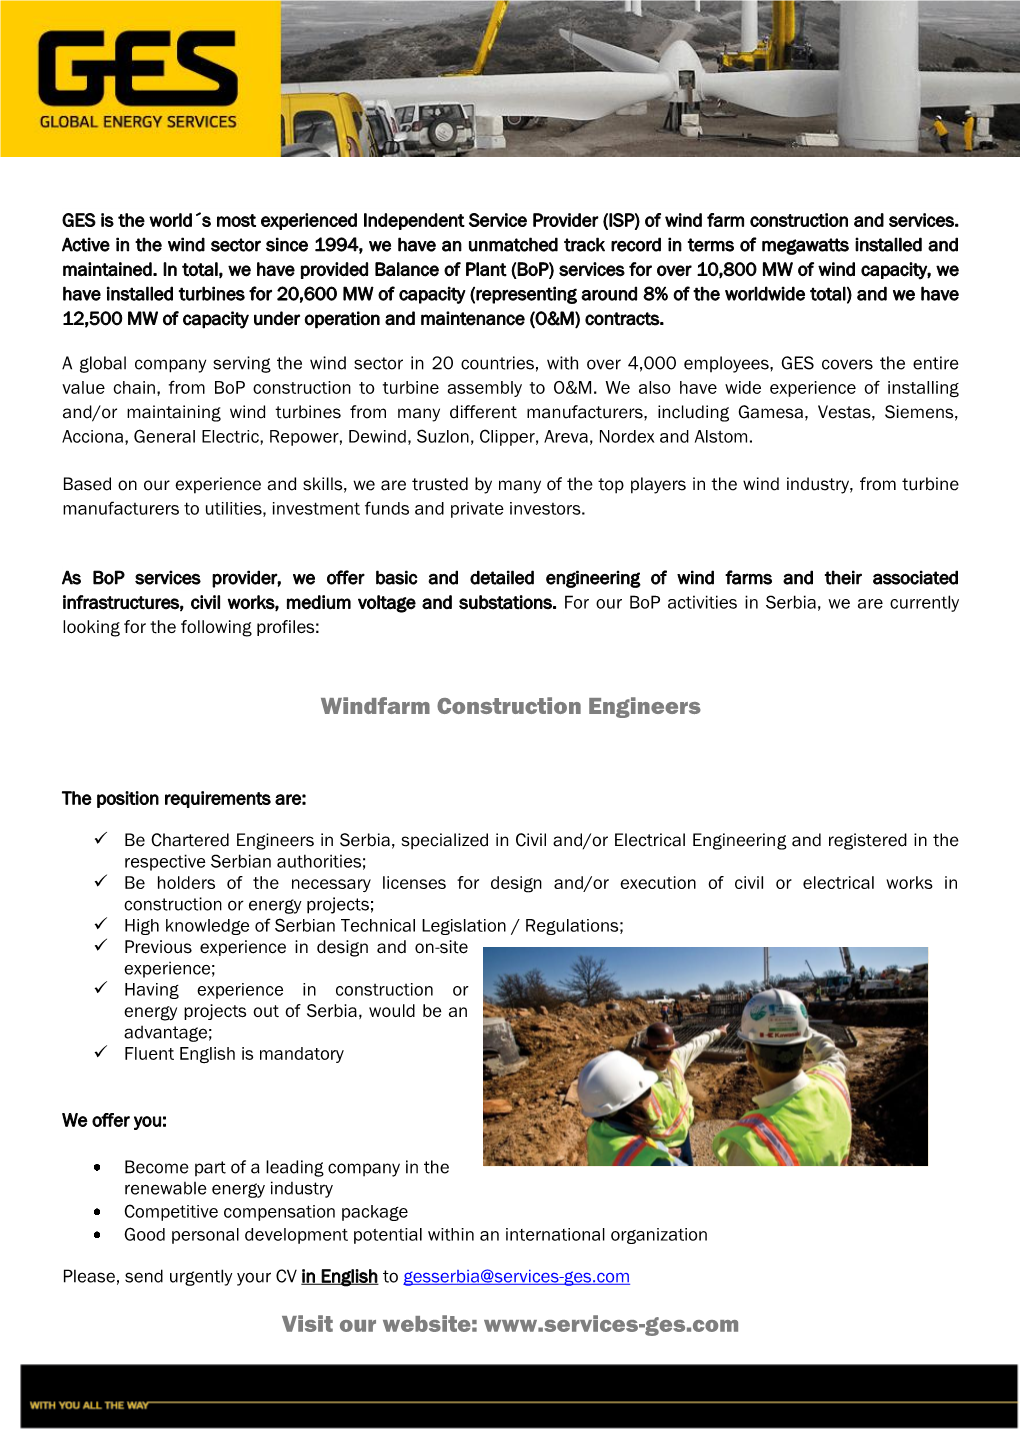 Windfarm Construction Engineers Visit Our Website